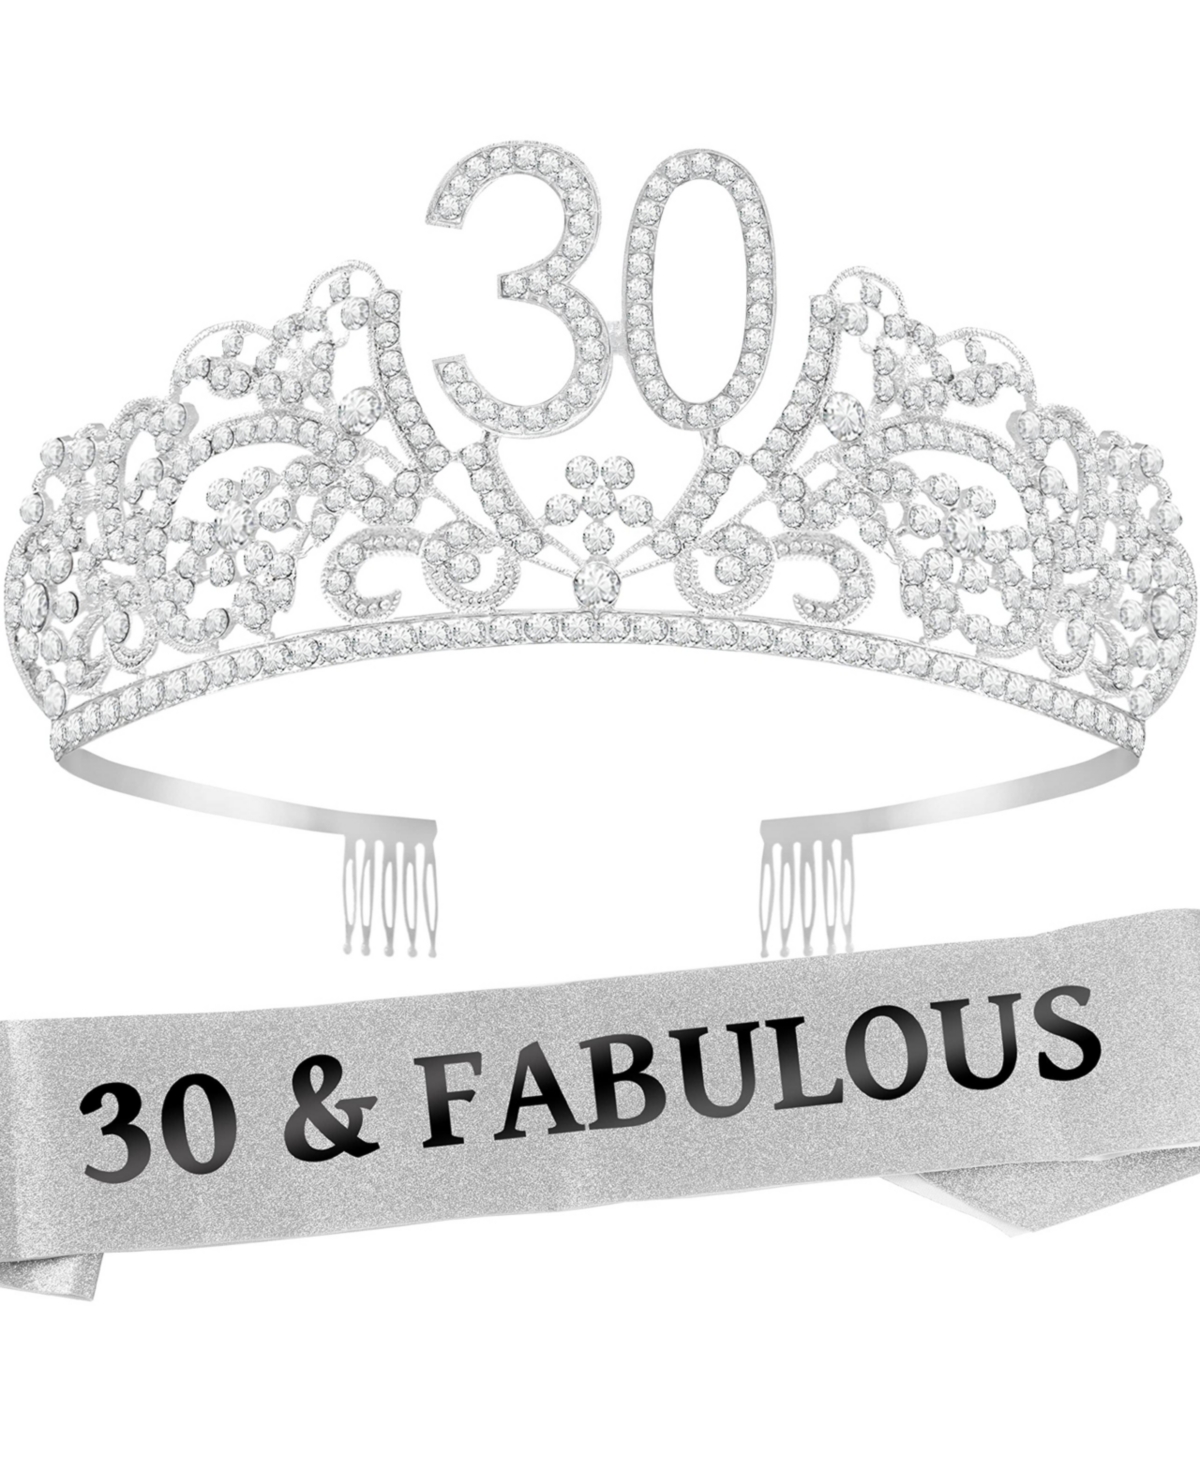 30th Birthday Sash and Tiara Set for Women - Glitter Sash with Flowers and Rhinestone Silver Metal Tiara, Perfect 30th Birthday Party Gifts and Access